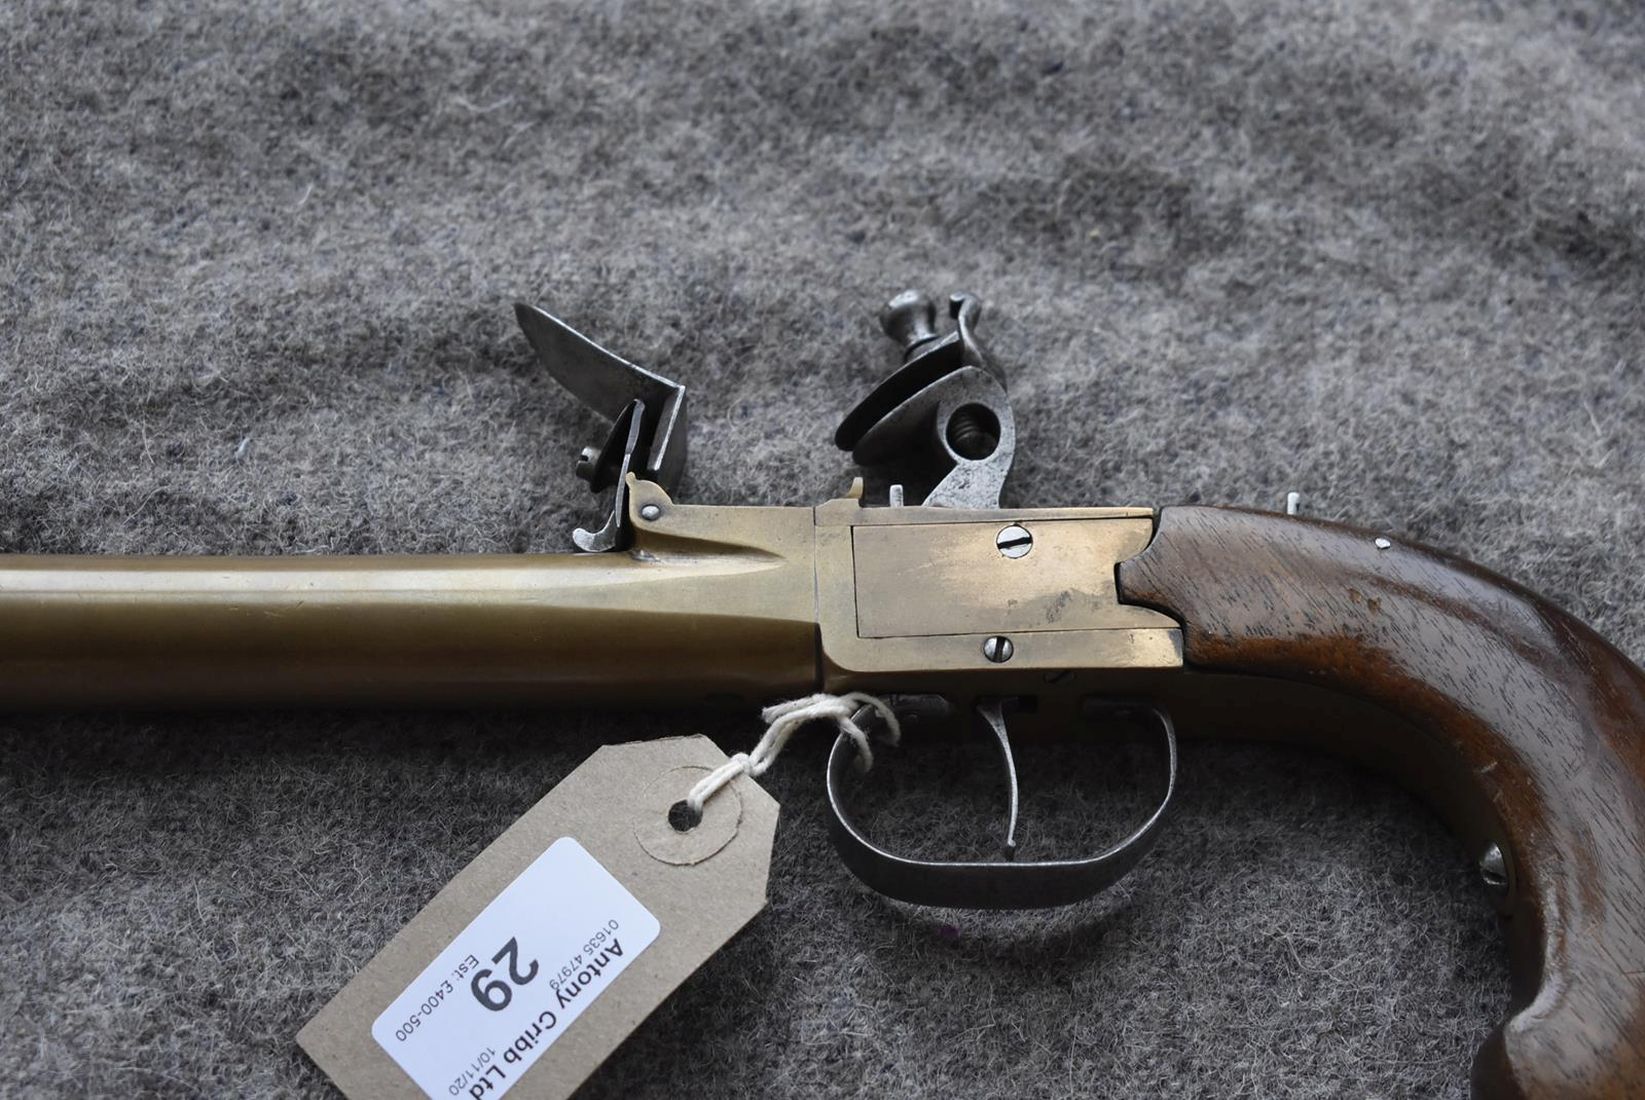 A 15-BORE BRASS BLUNDERBUSS PISTOL, 6.5inch barrel with ring turned muzzle, plain action, sliding - Image 7 of 8